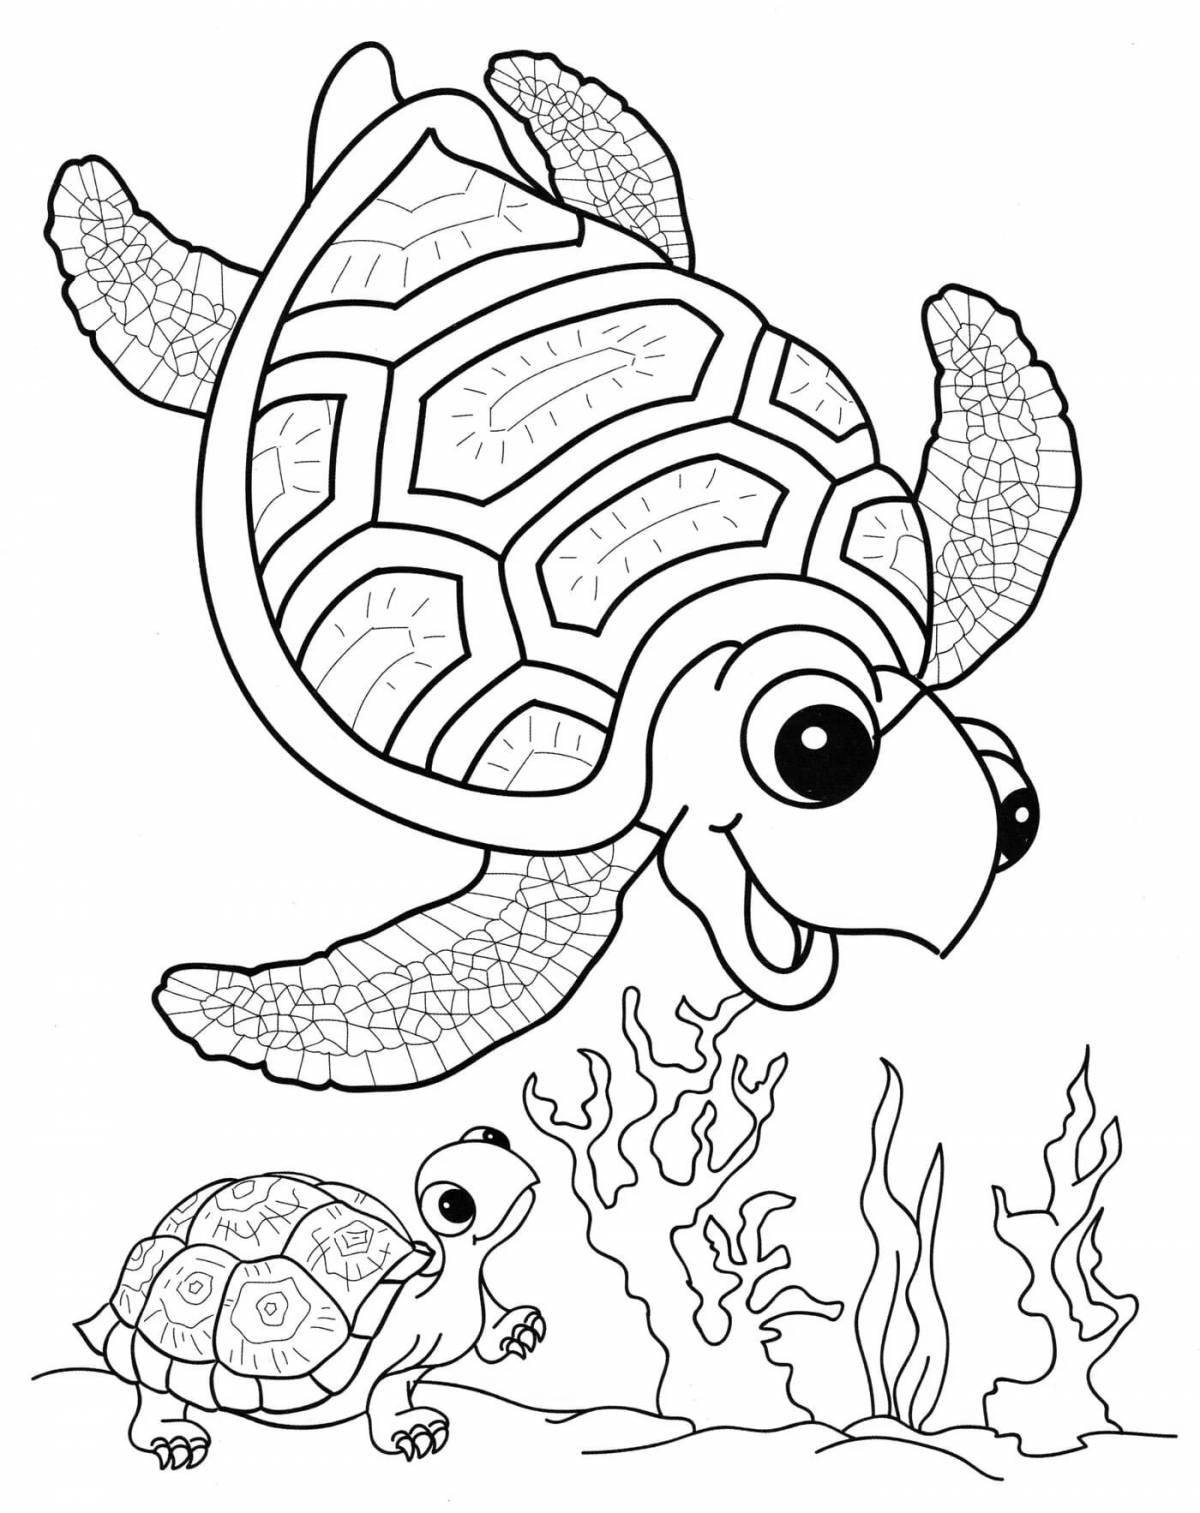 Exquisite marine life coloring book for 6-7 year olds